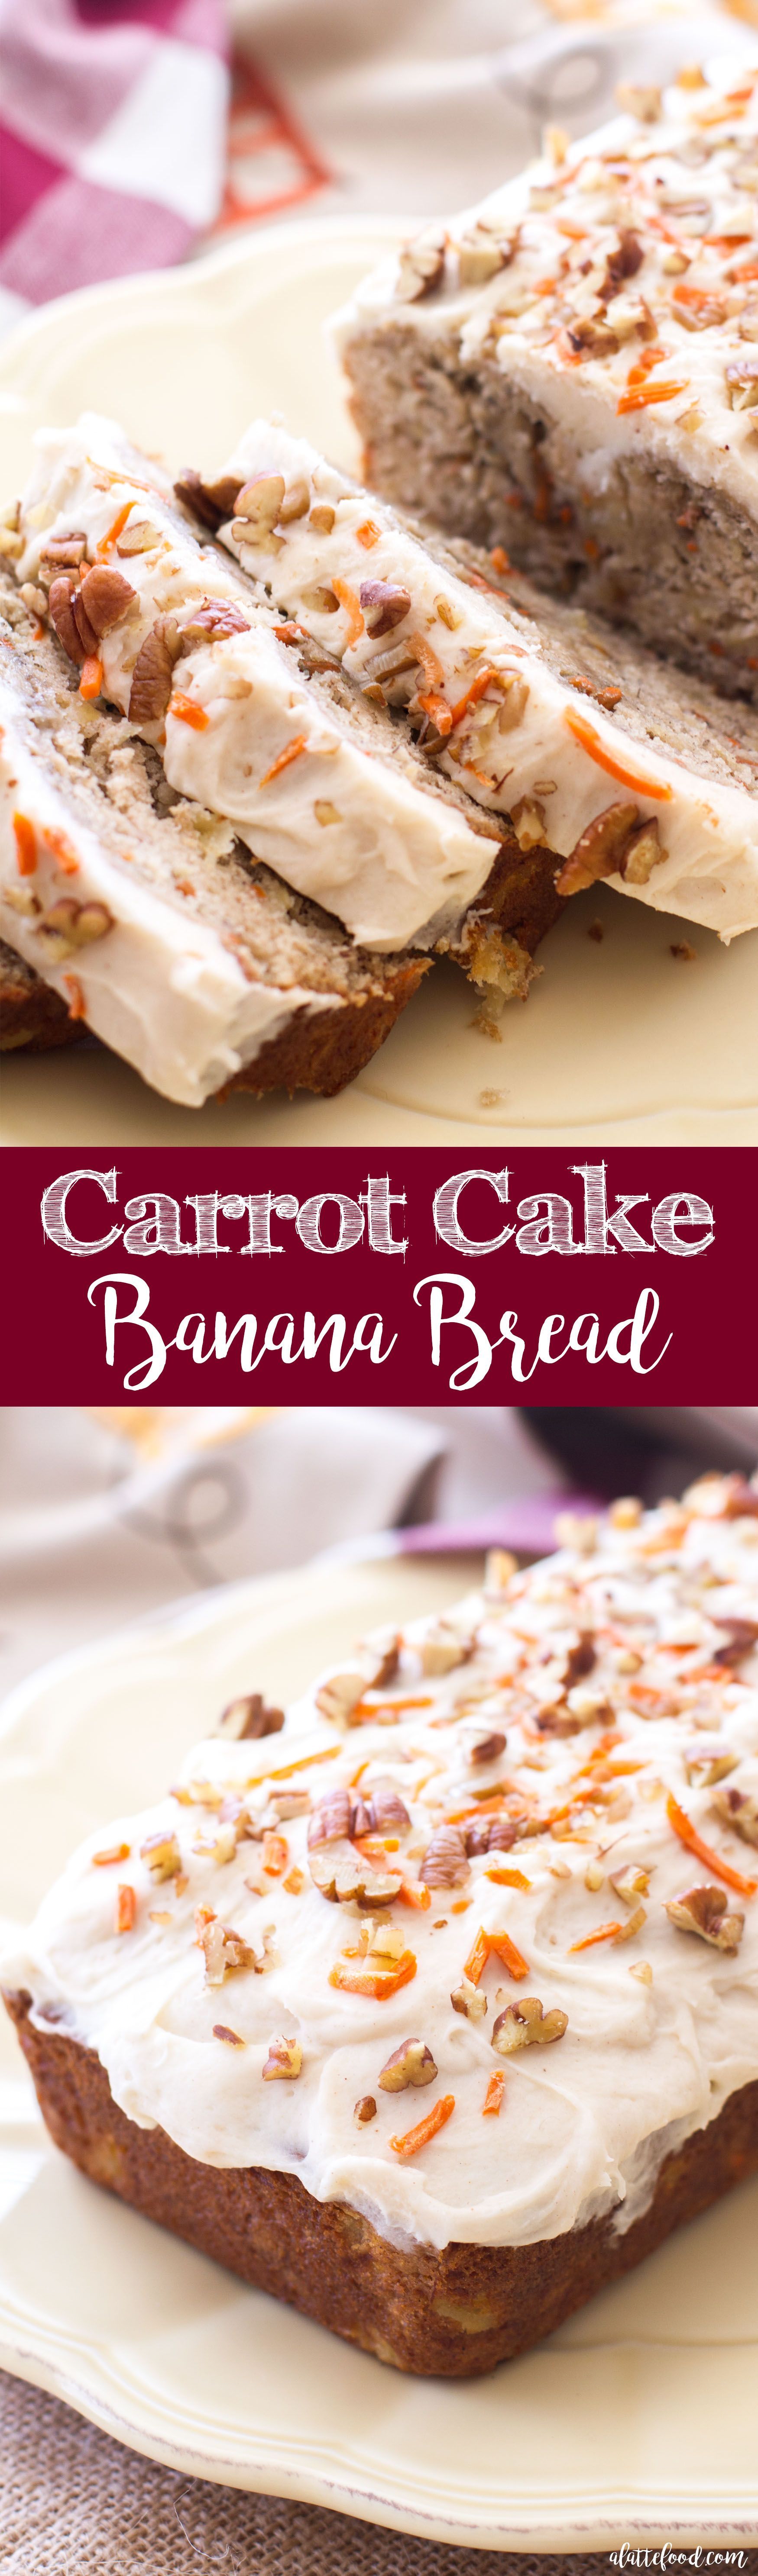 Carrot cake meets banana bread in this easy quick bread recipe! Moist, flavorful, and topped with rich homemade cream cheese